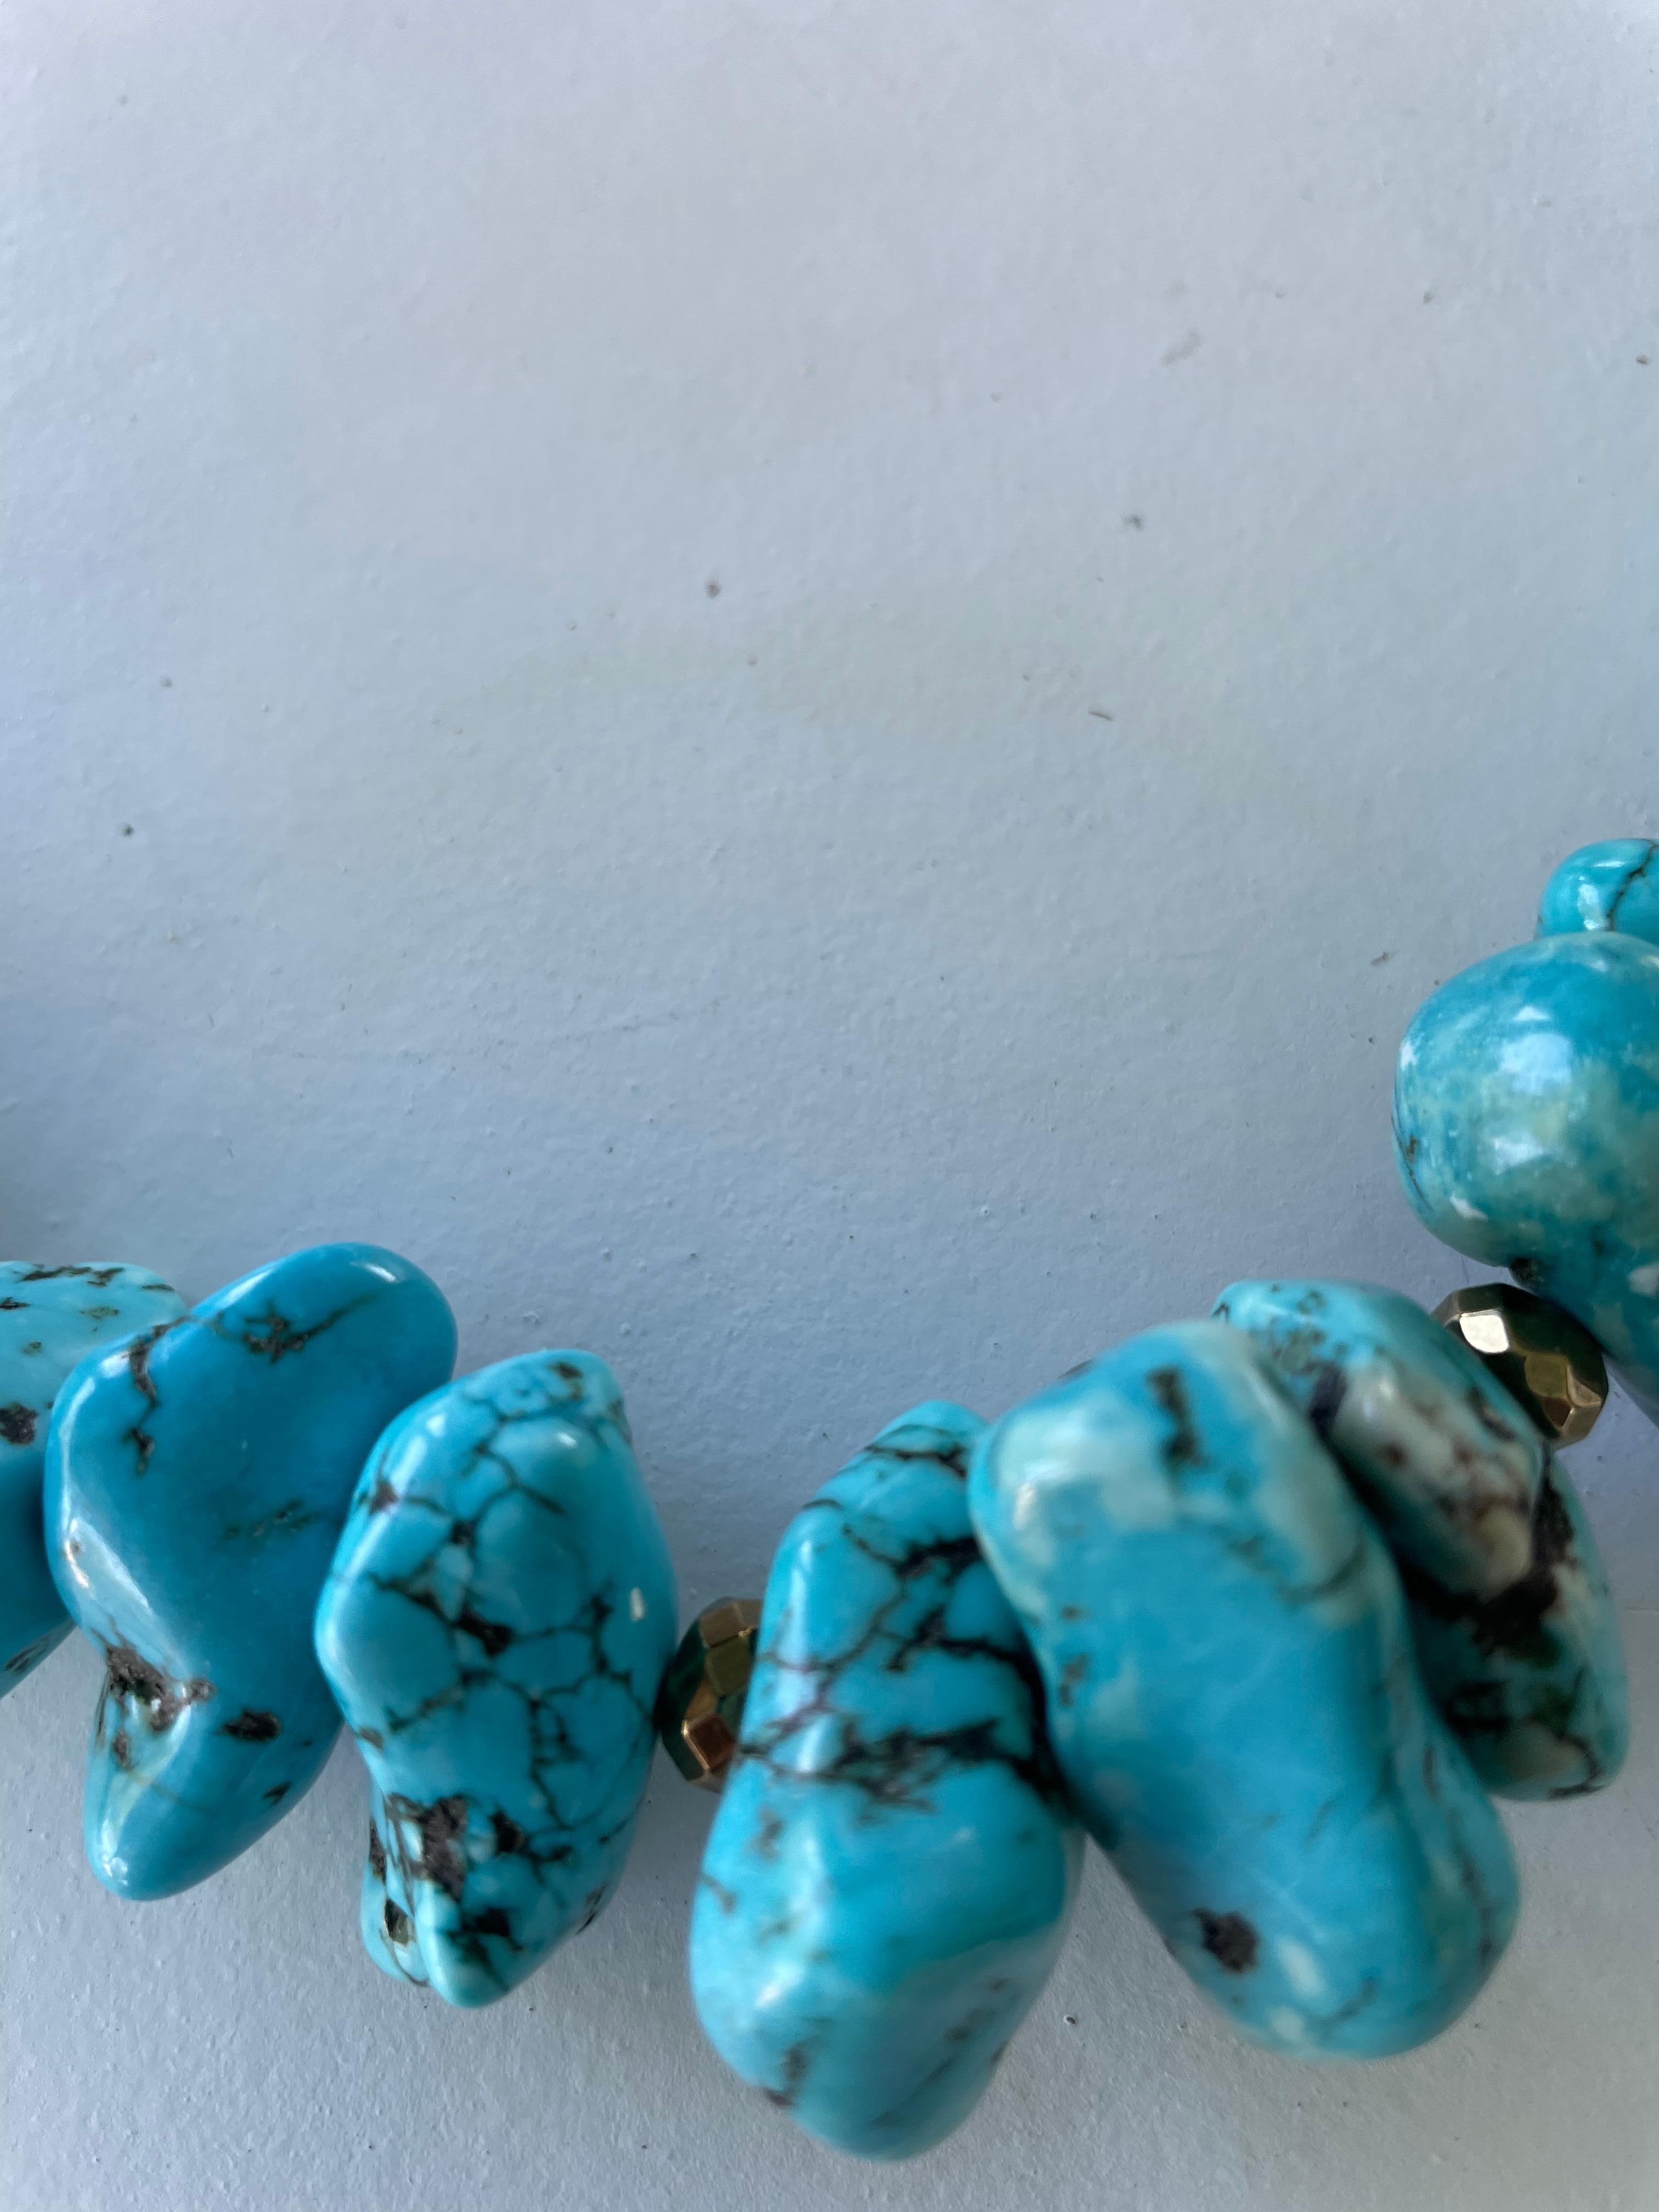 A one of a kind, handmade, statement turquoise necklace is offered from Lorraine’s Bijoux. All new turquoise pieces are combined with handmade Indonesian beads and the turquoise chunks are from China. The enameled beads are Indonesian and the